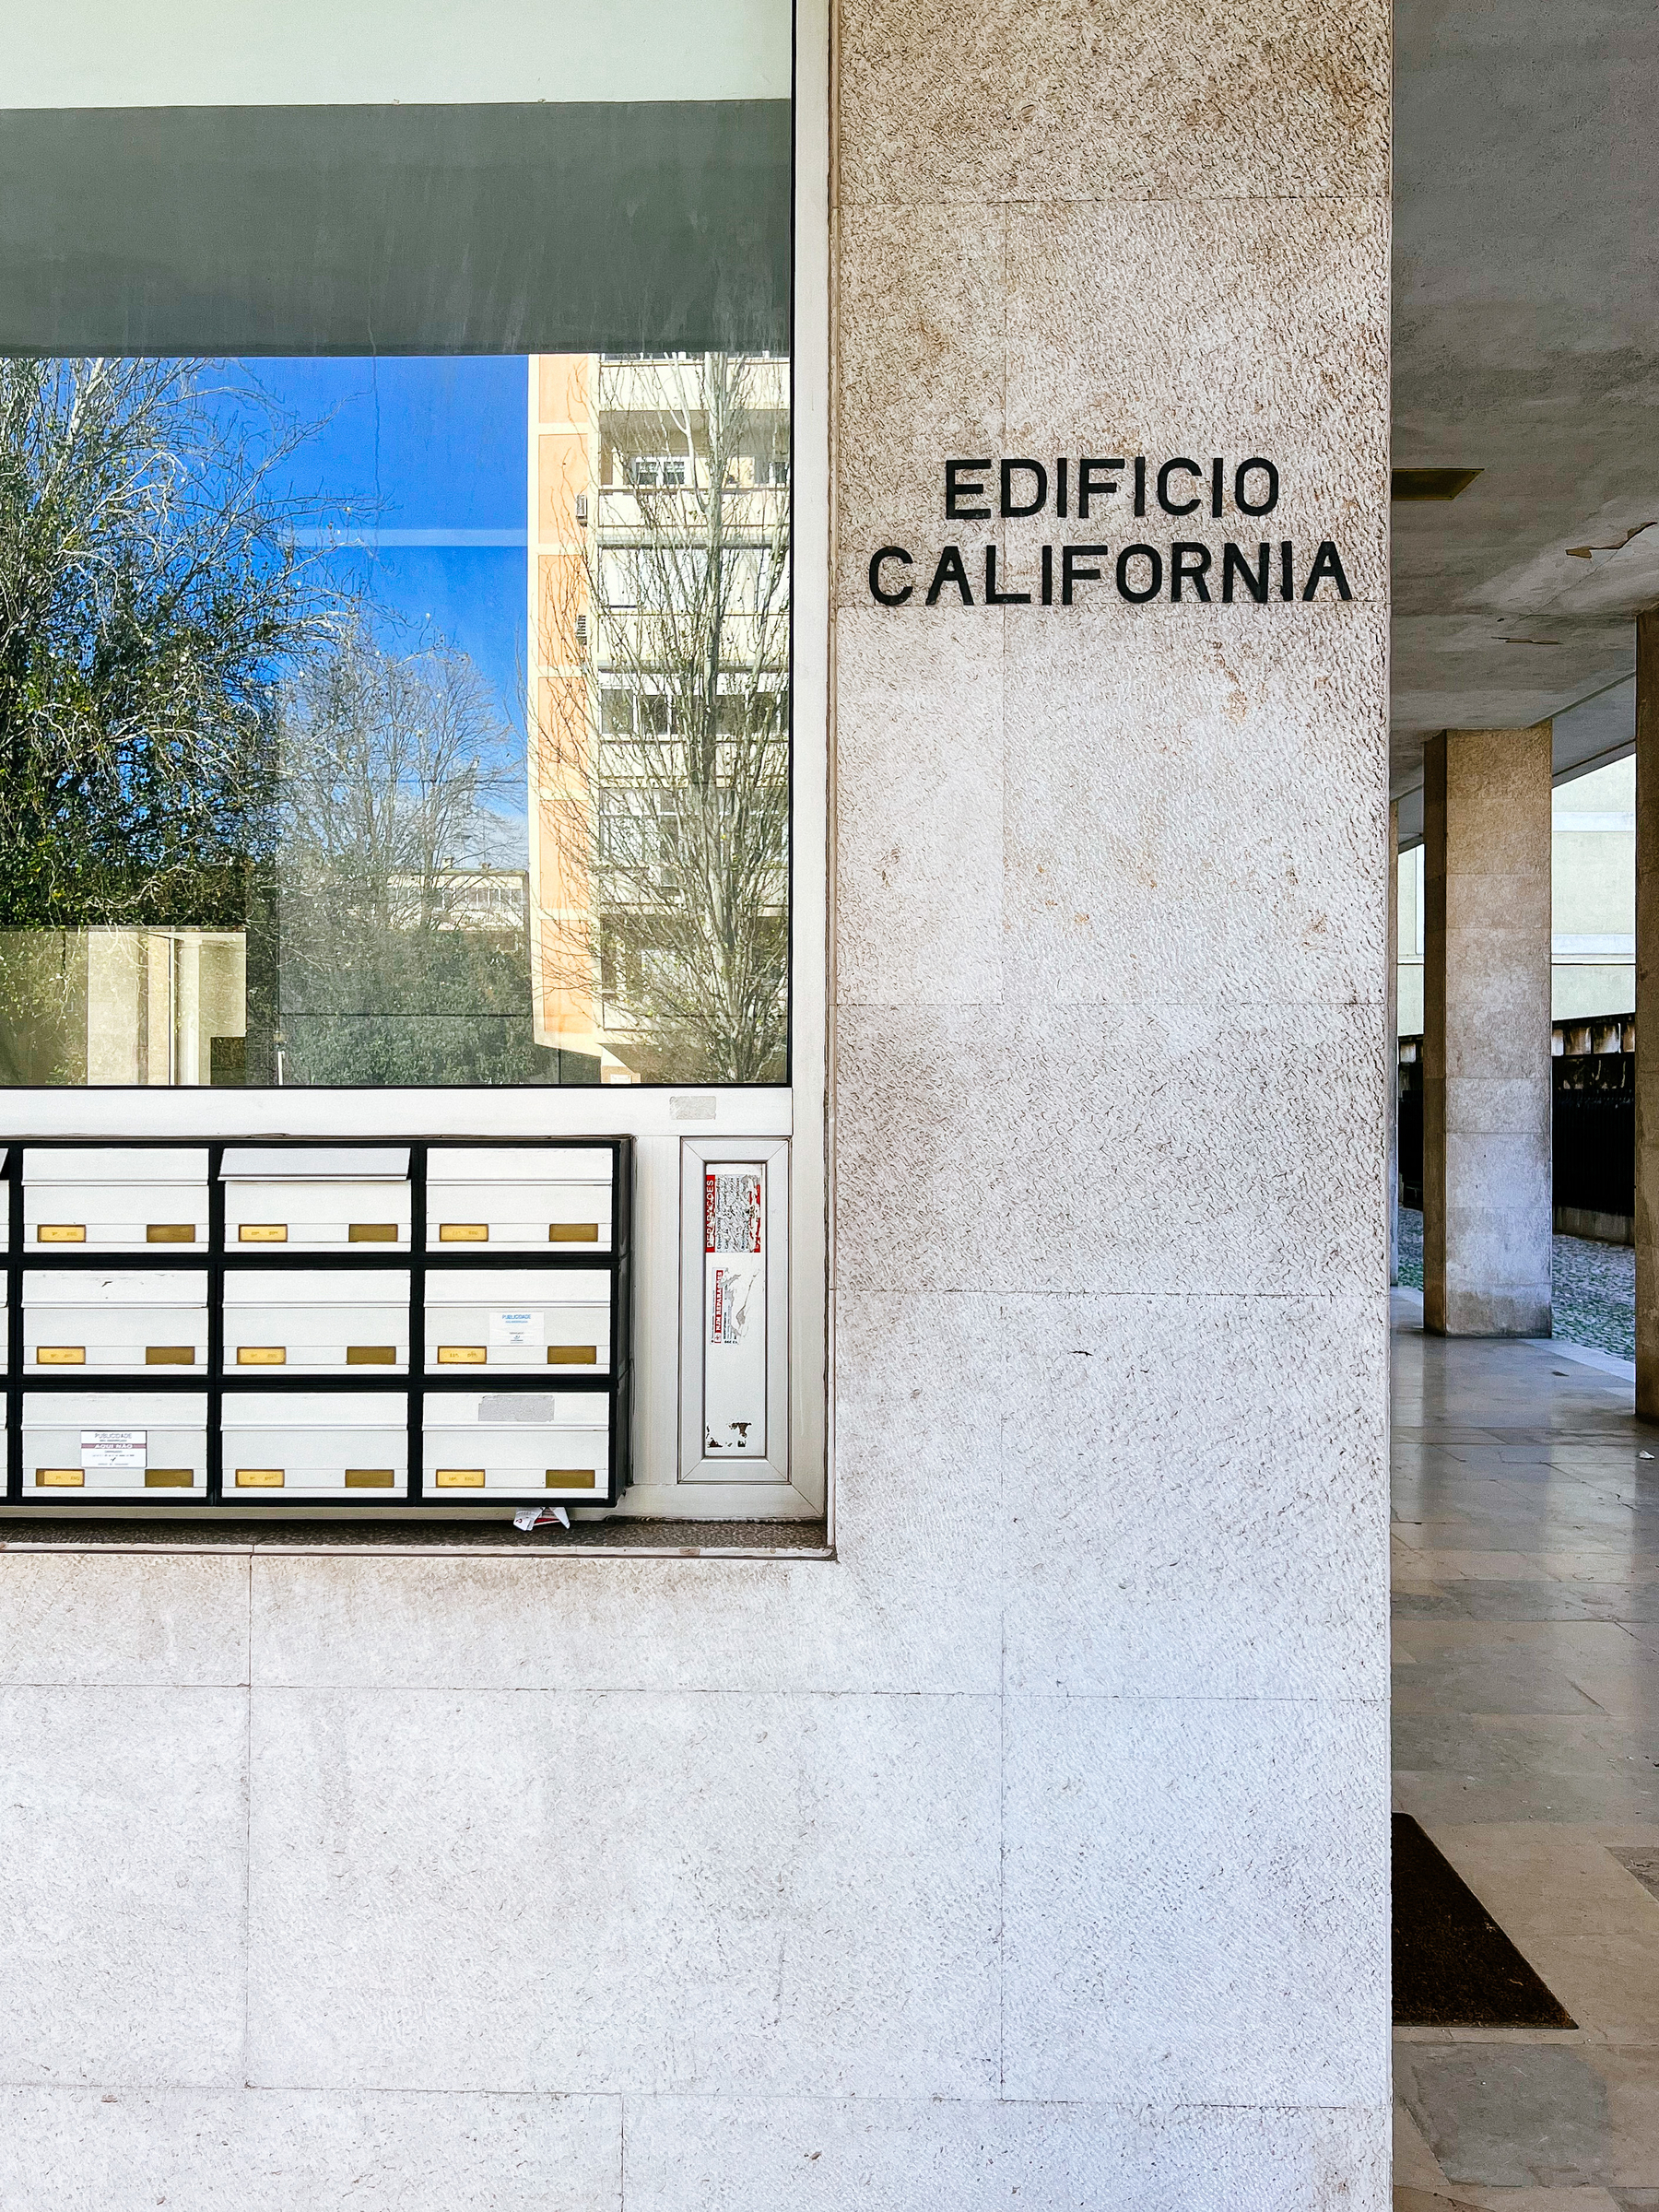 Entrance to a building, with some mailboxes, and a sign that says “Edifício Califórni”, California Building in Portuguese. 